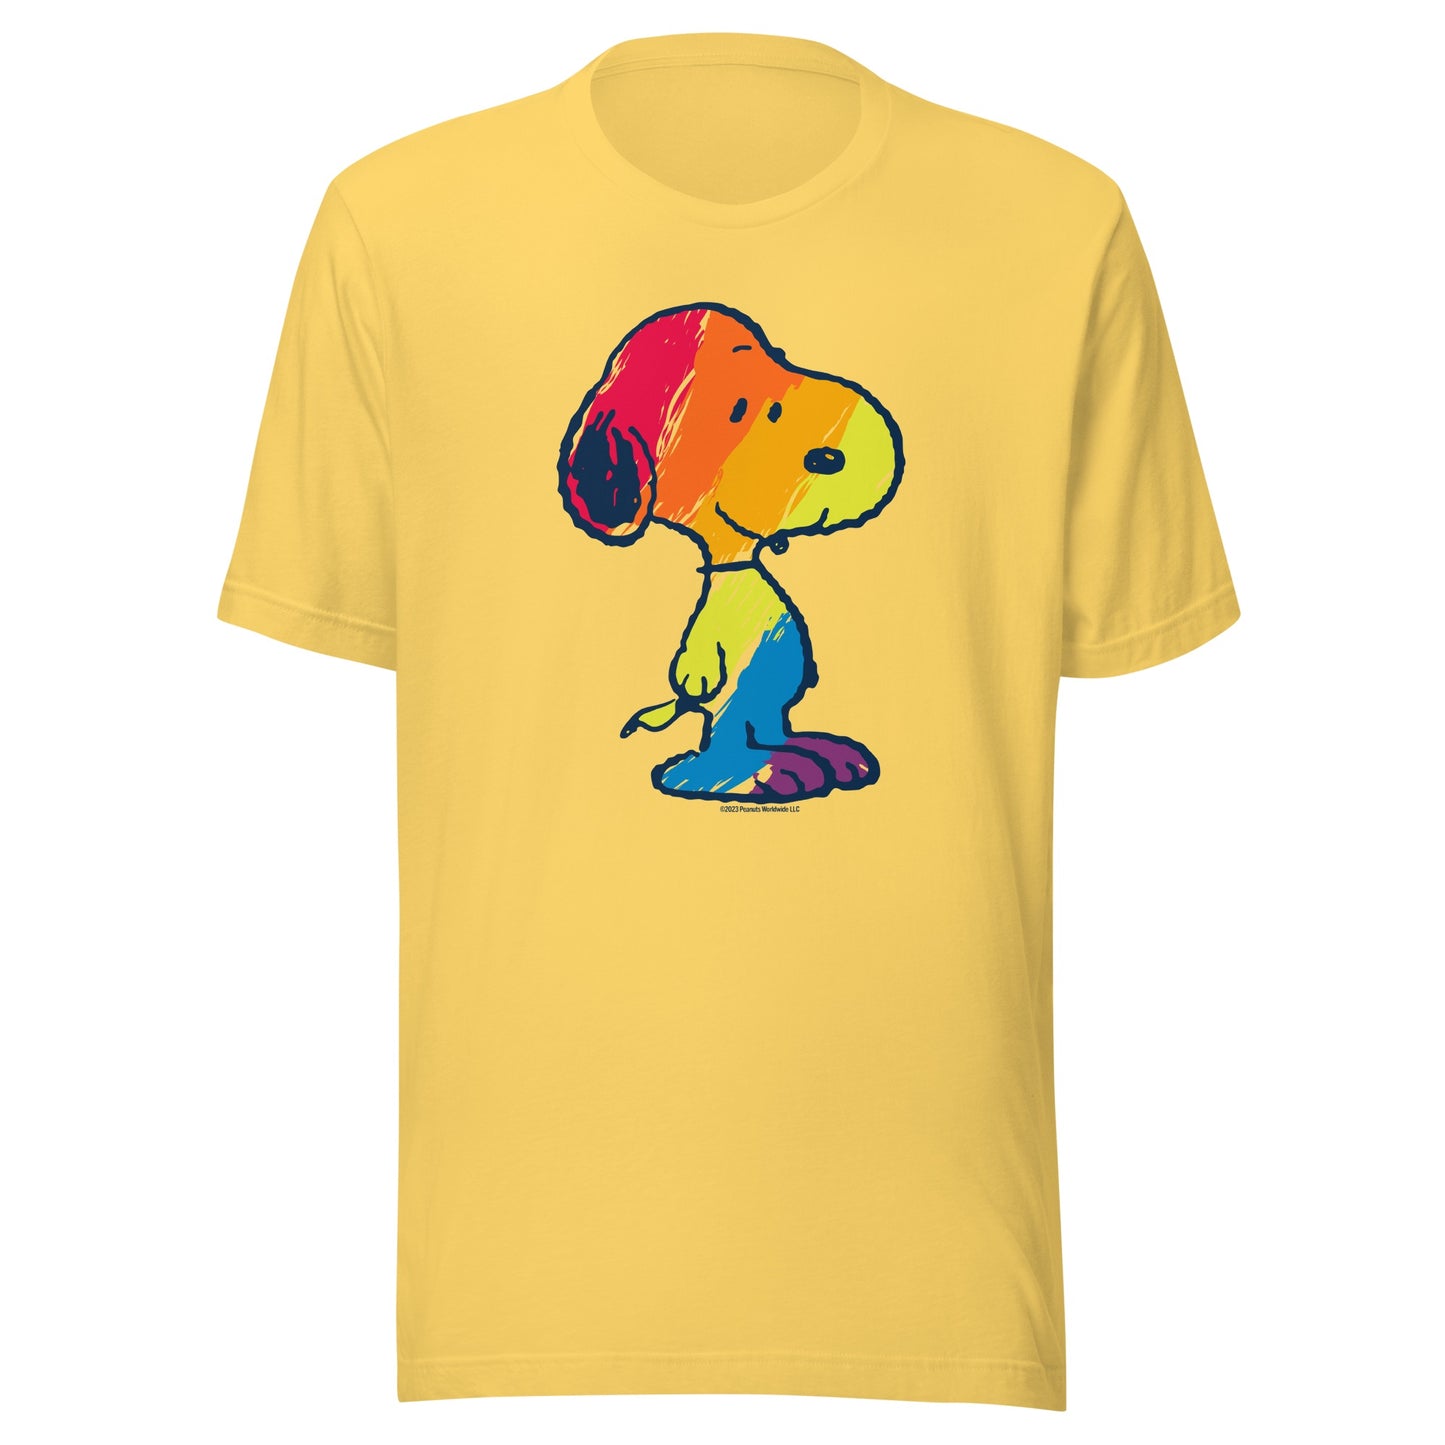 Snoopy Rainbow Colored Adult T-Shirt